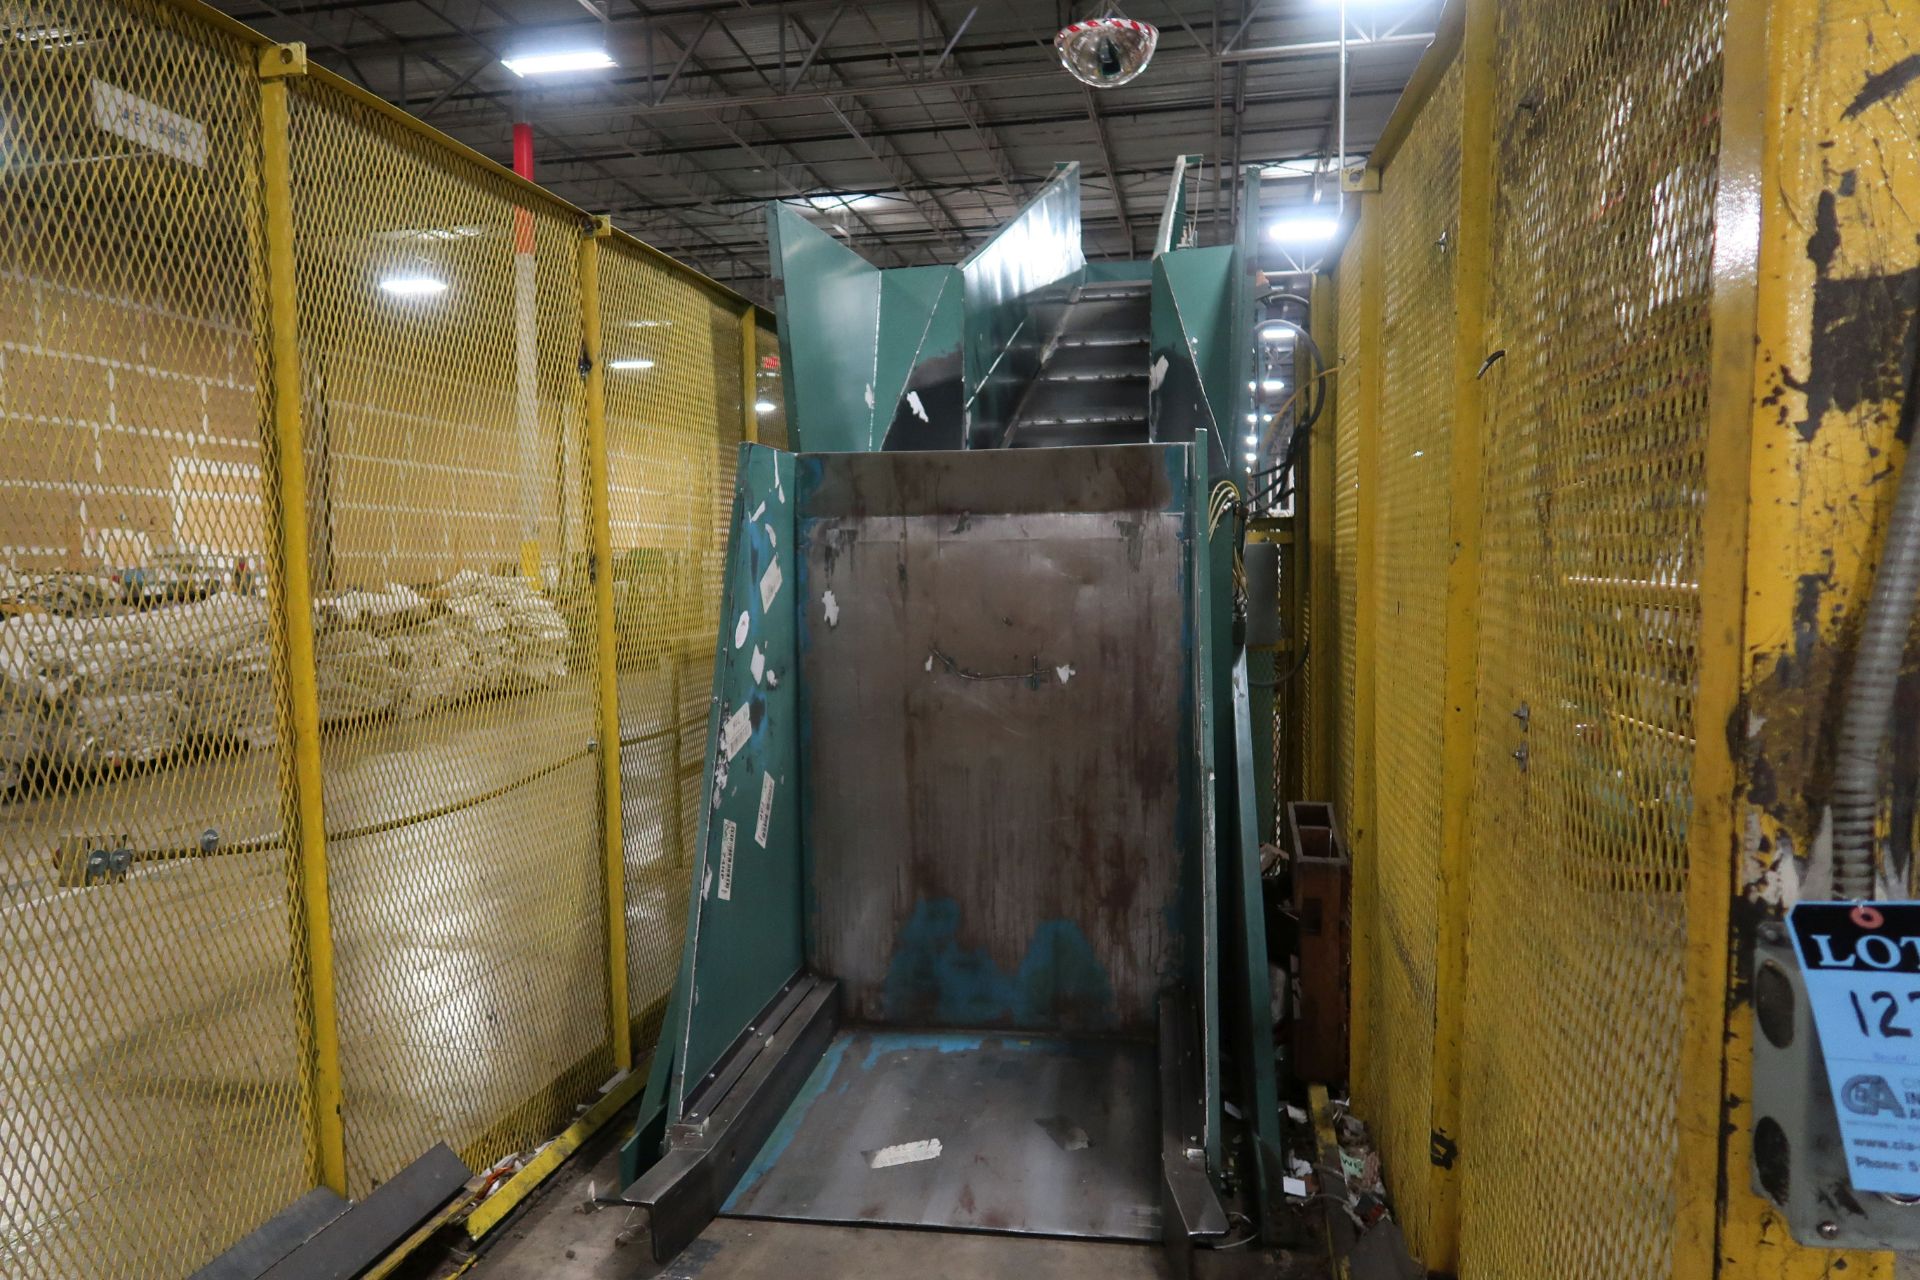 50-HP HARRIS SELCO MODEL HLO-128A50T HORIZONTAL OPEN-END BALER W/ AUTO-TIE; S/N 039870180, 30" WIDE - Image 2 of 34